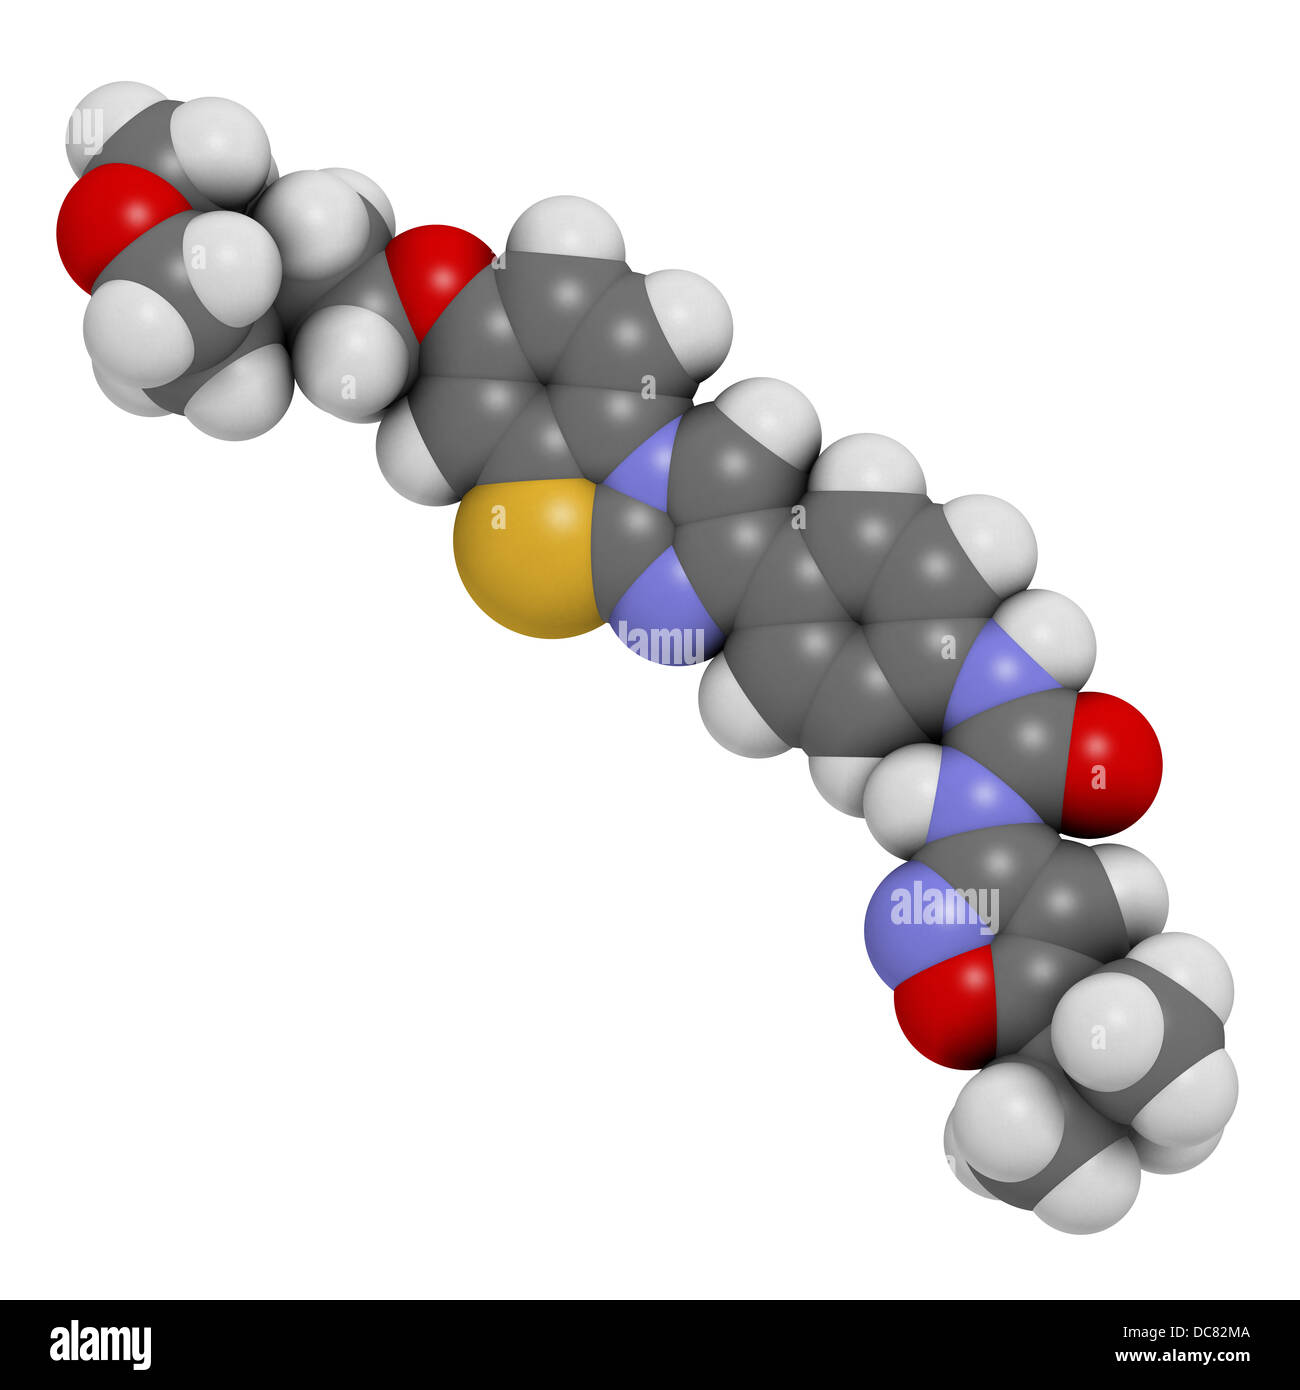 Quizartinib investigational acute myeloid leukemia (AML) drug, chemical structure Atoms are represented as spheres. Stock Photo